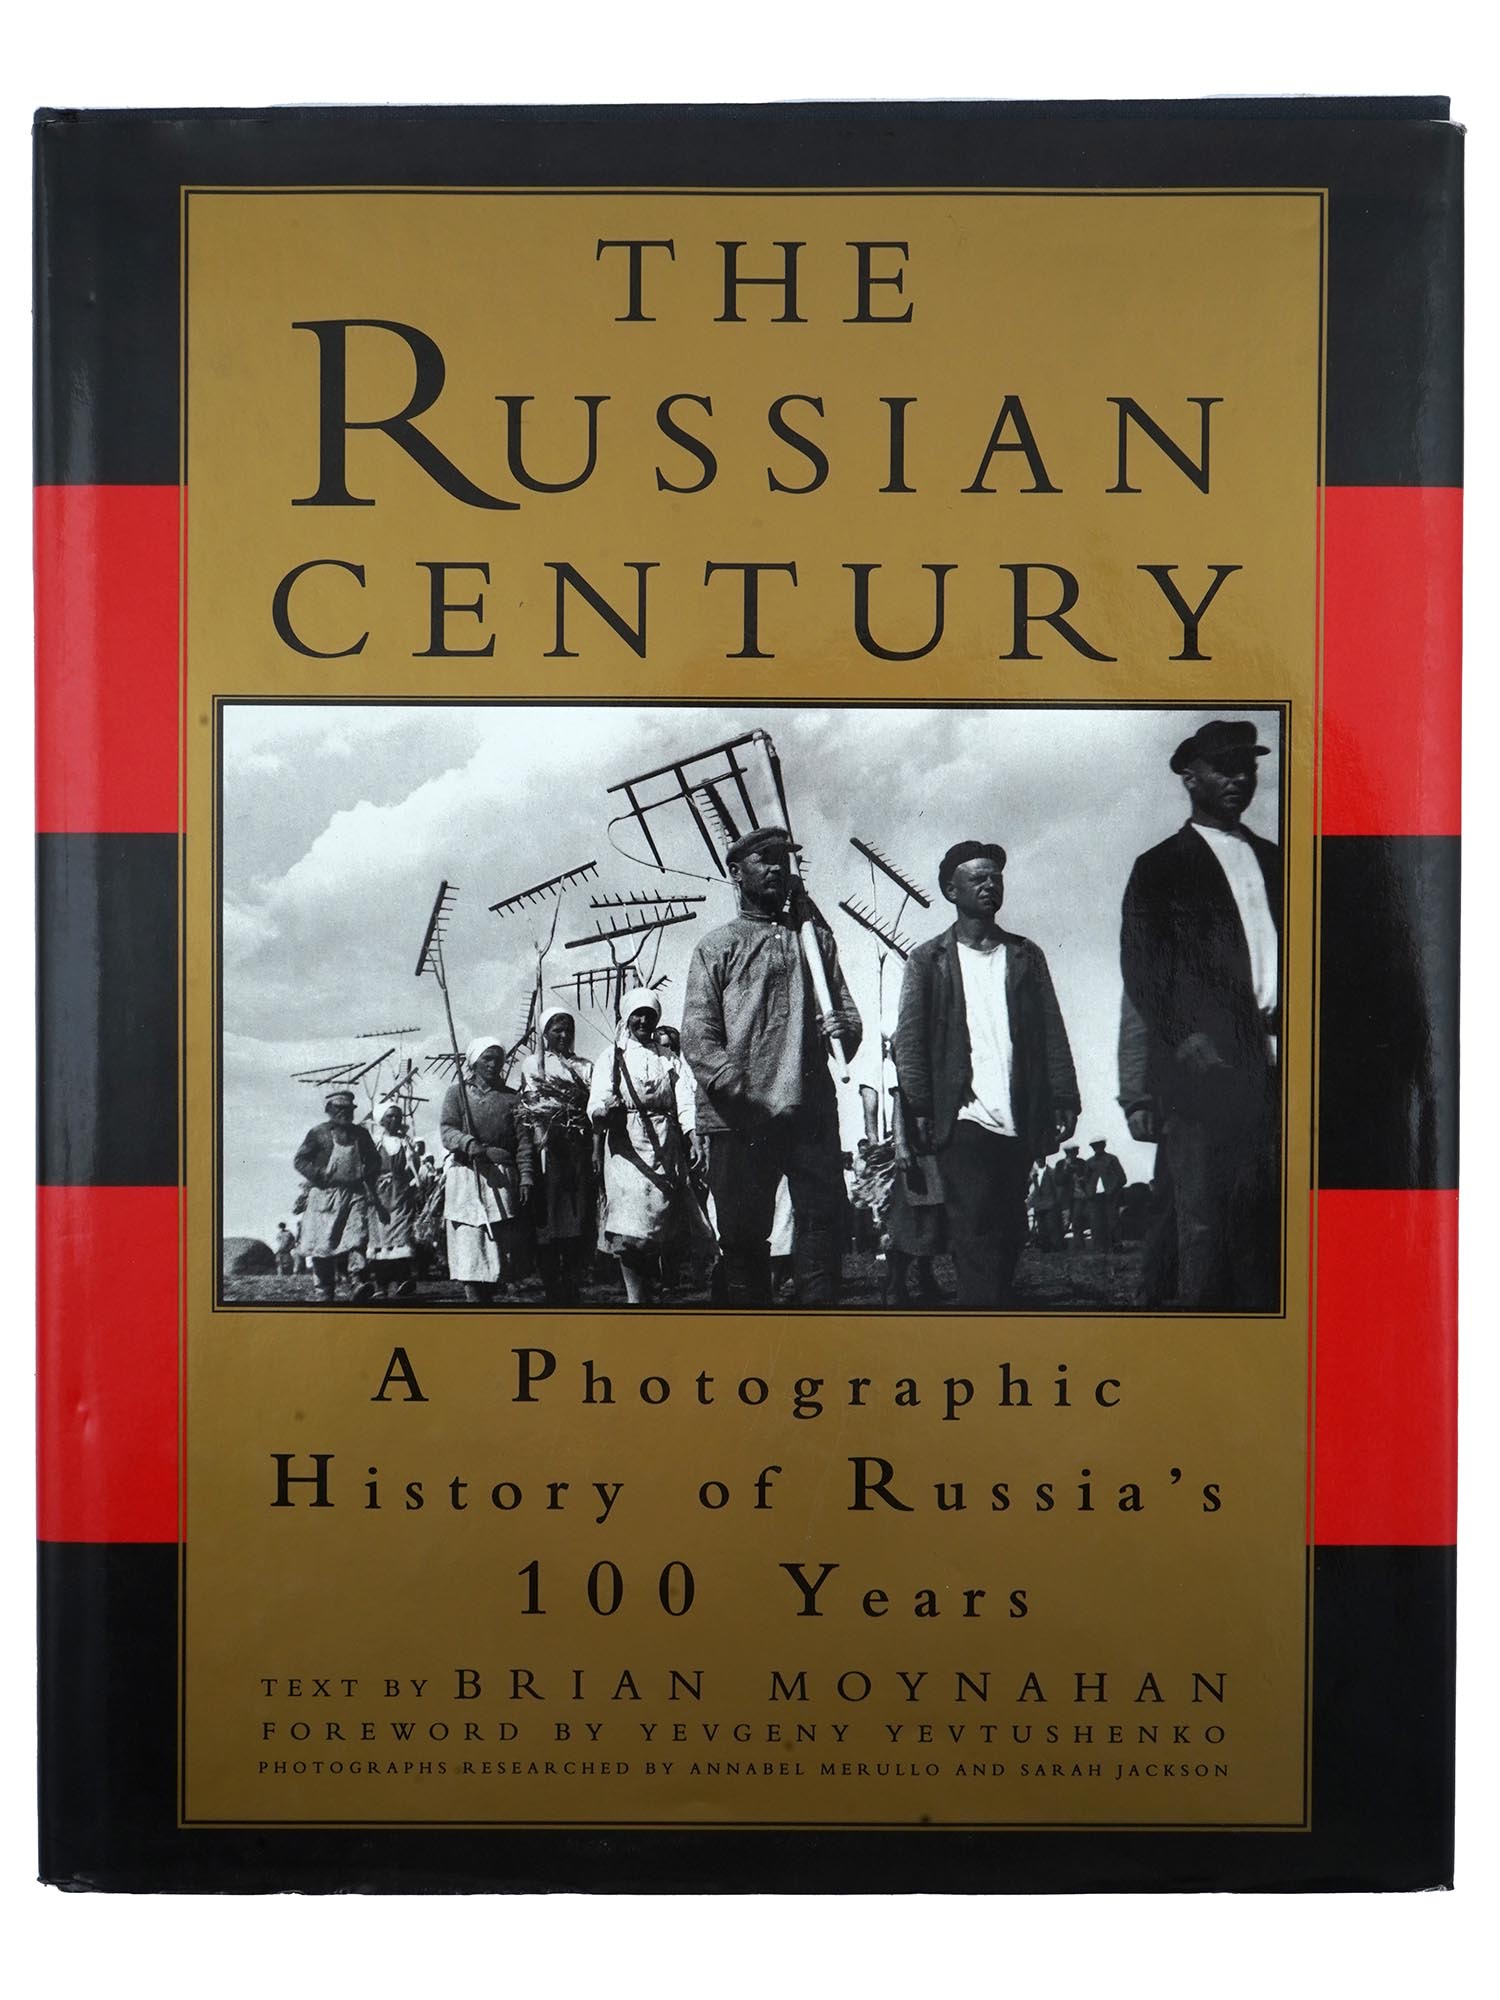 VINTAGE ALBUM RUSSIAN CENTURY A PHOTOGRAPHIC HISTORY PIC-2